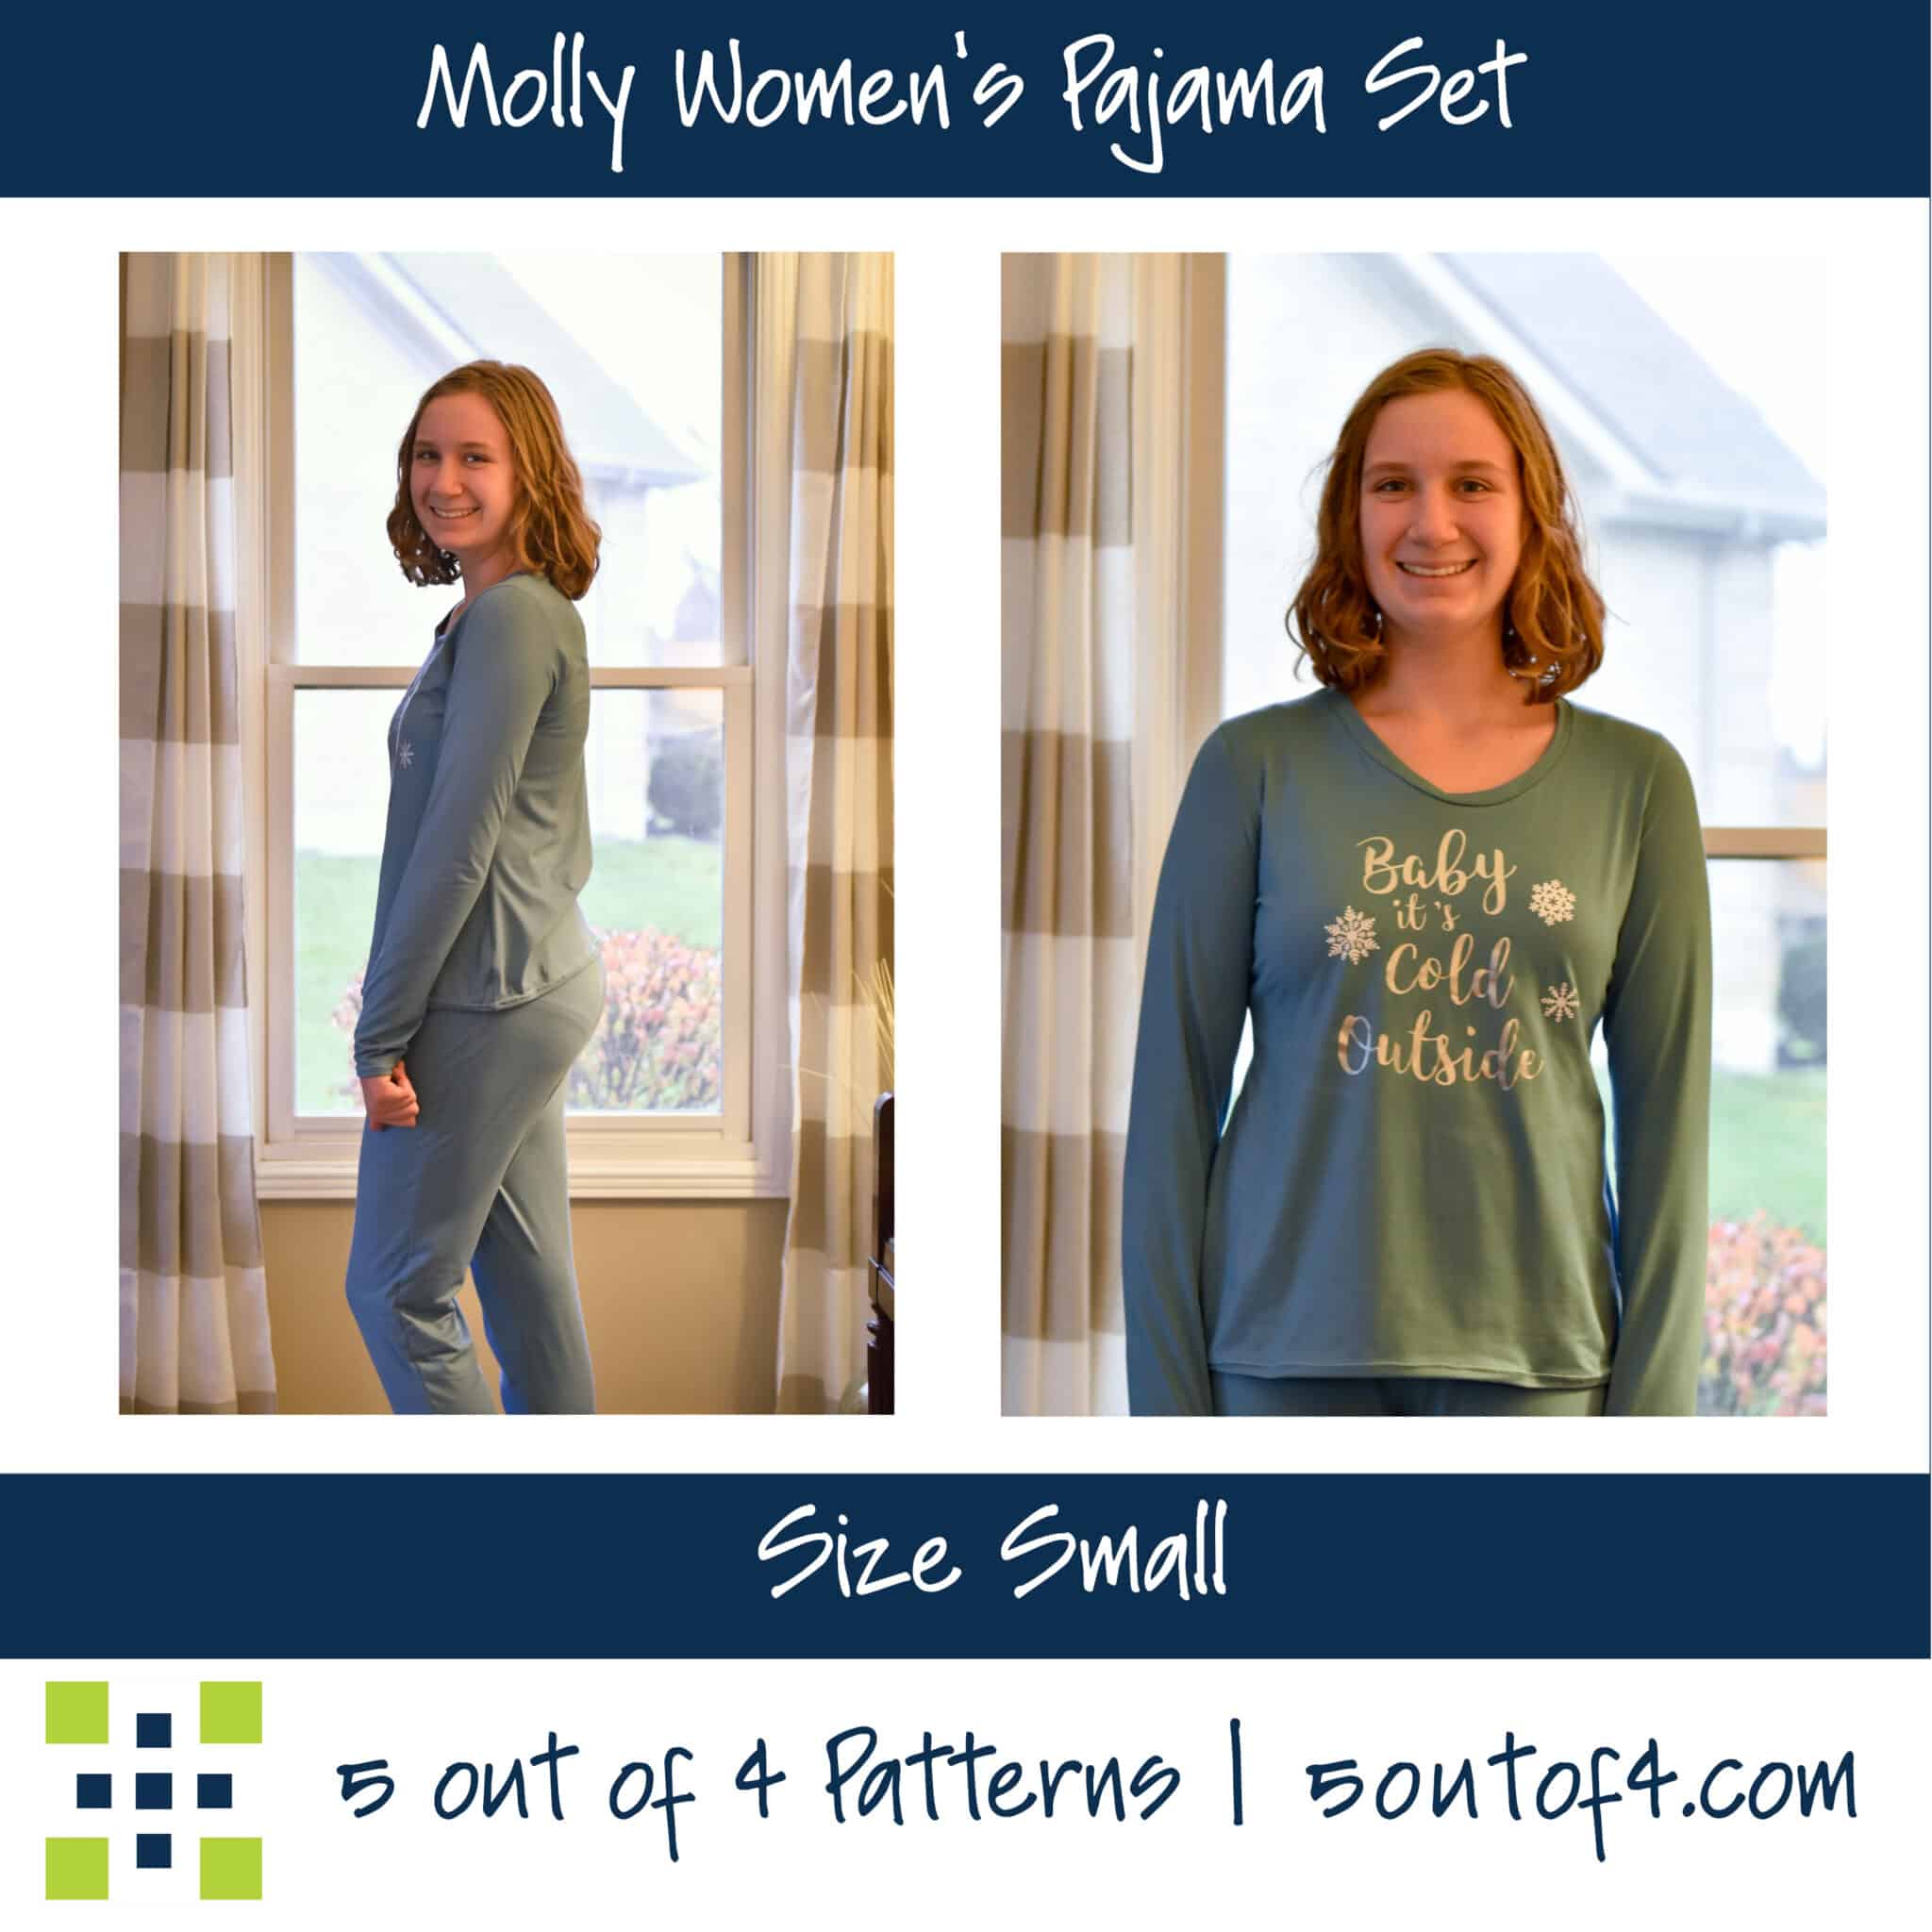 Molly Pajama Set - 5 out of 4 Patterns